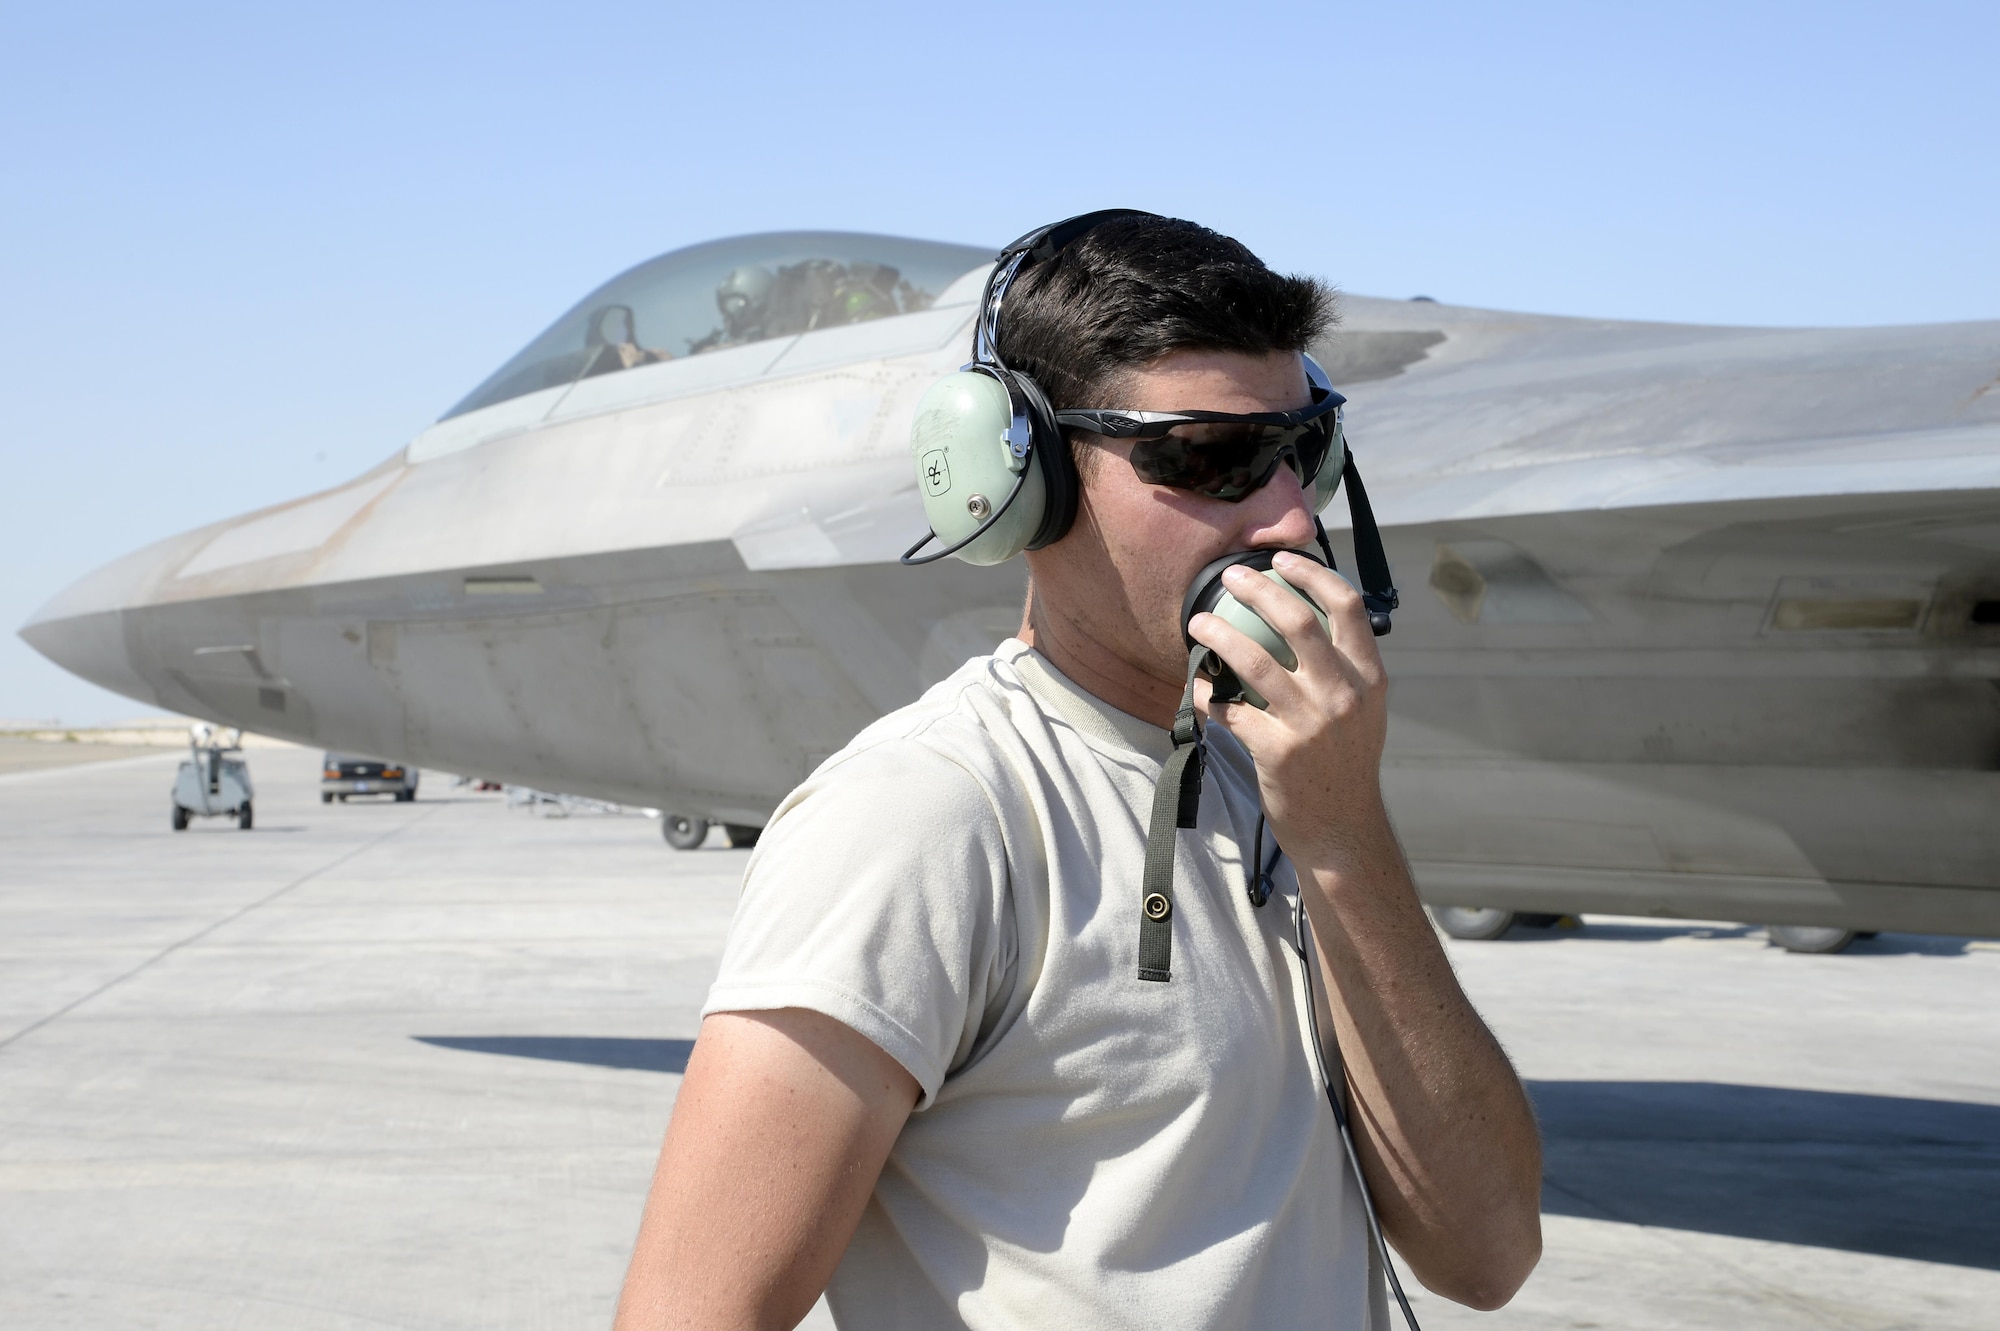 Airman 1st Class Kyle, crew chief, talks to the pilot of an F-22 Raptor prior to taxi at an undisclosed location in Southwest Asia Jan. 26, 2015. The F-22 Raptor, which became operational in 2005, is the Air Force's newest fighter aircraft and cannot be matched by any known or projected fighter aircraft. Kyle is currently deployed from Tyndall Air Force Base, Fla., and is a native of Eagle River, Alaska. (U.S. Air Force/Tech. Sgt. Marie Brown)
